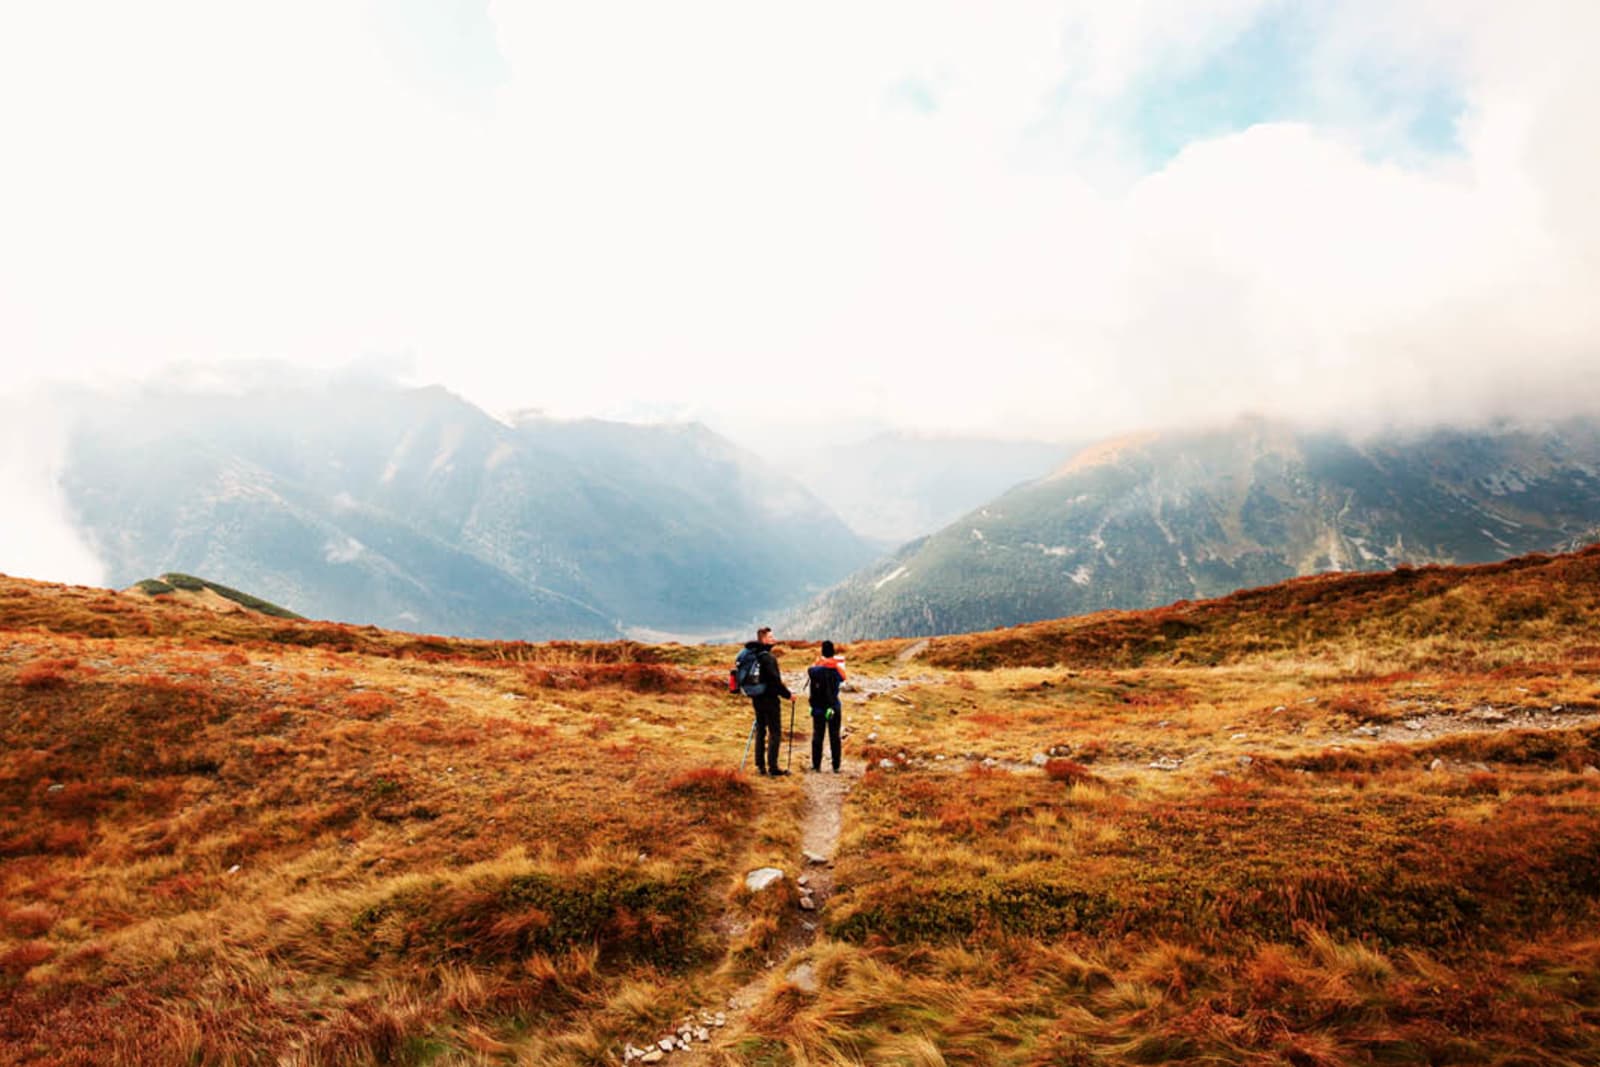 A pair of hikers in Tatra National Park, Poland